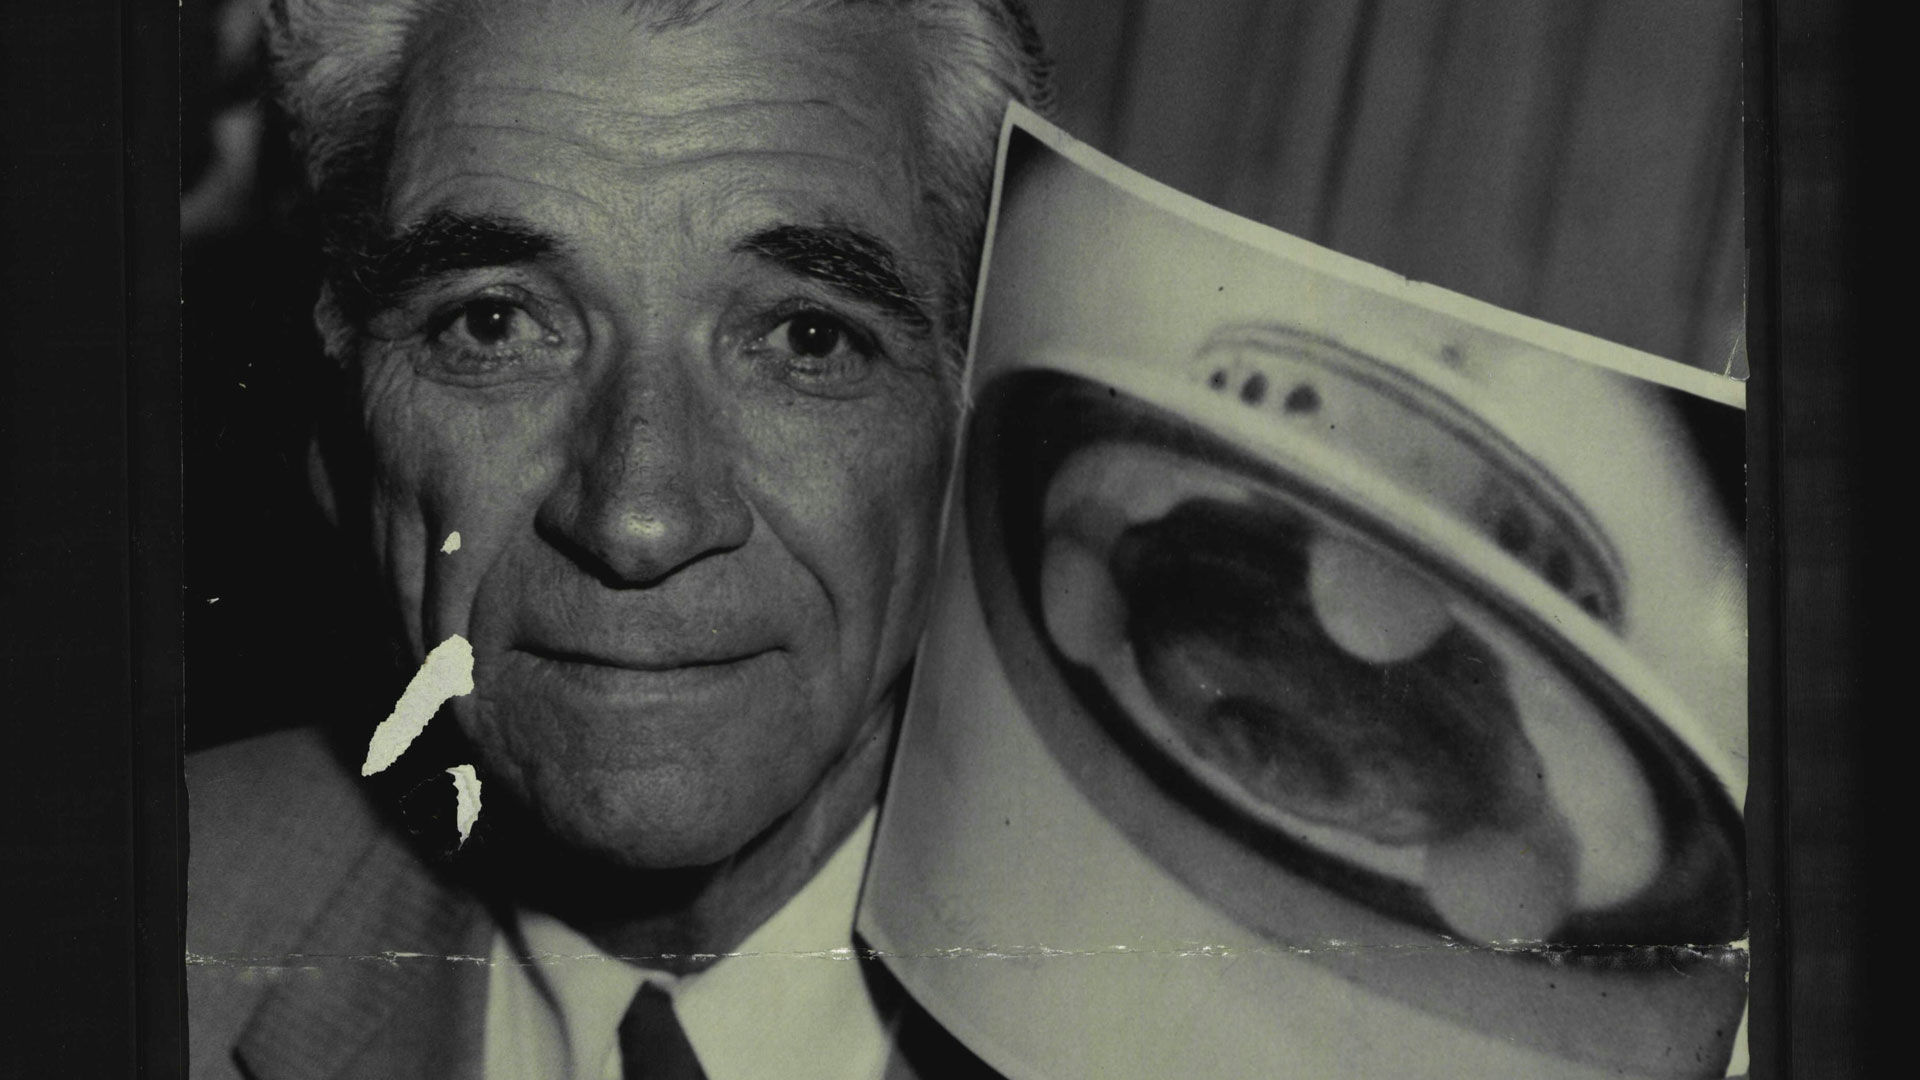 Read More: George Adamski Got Famous Sharing His UFO Photos and Alien ‘Encounters’